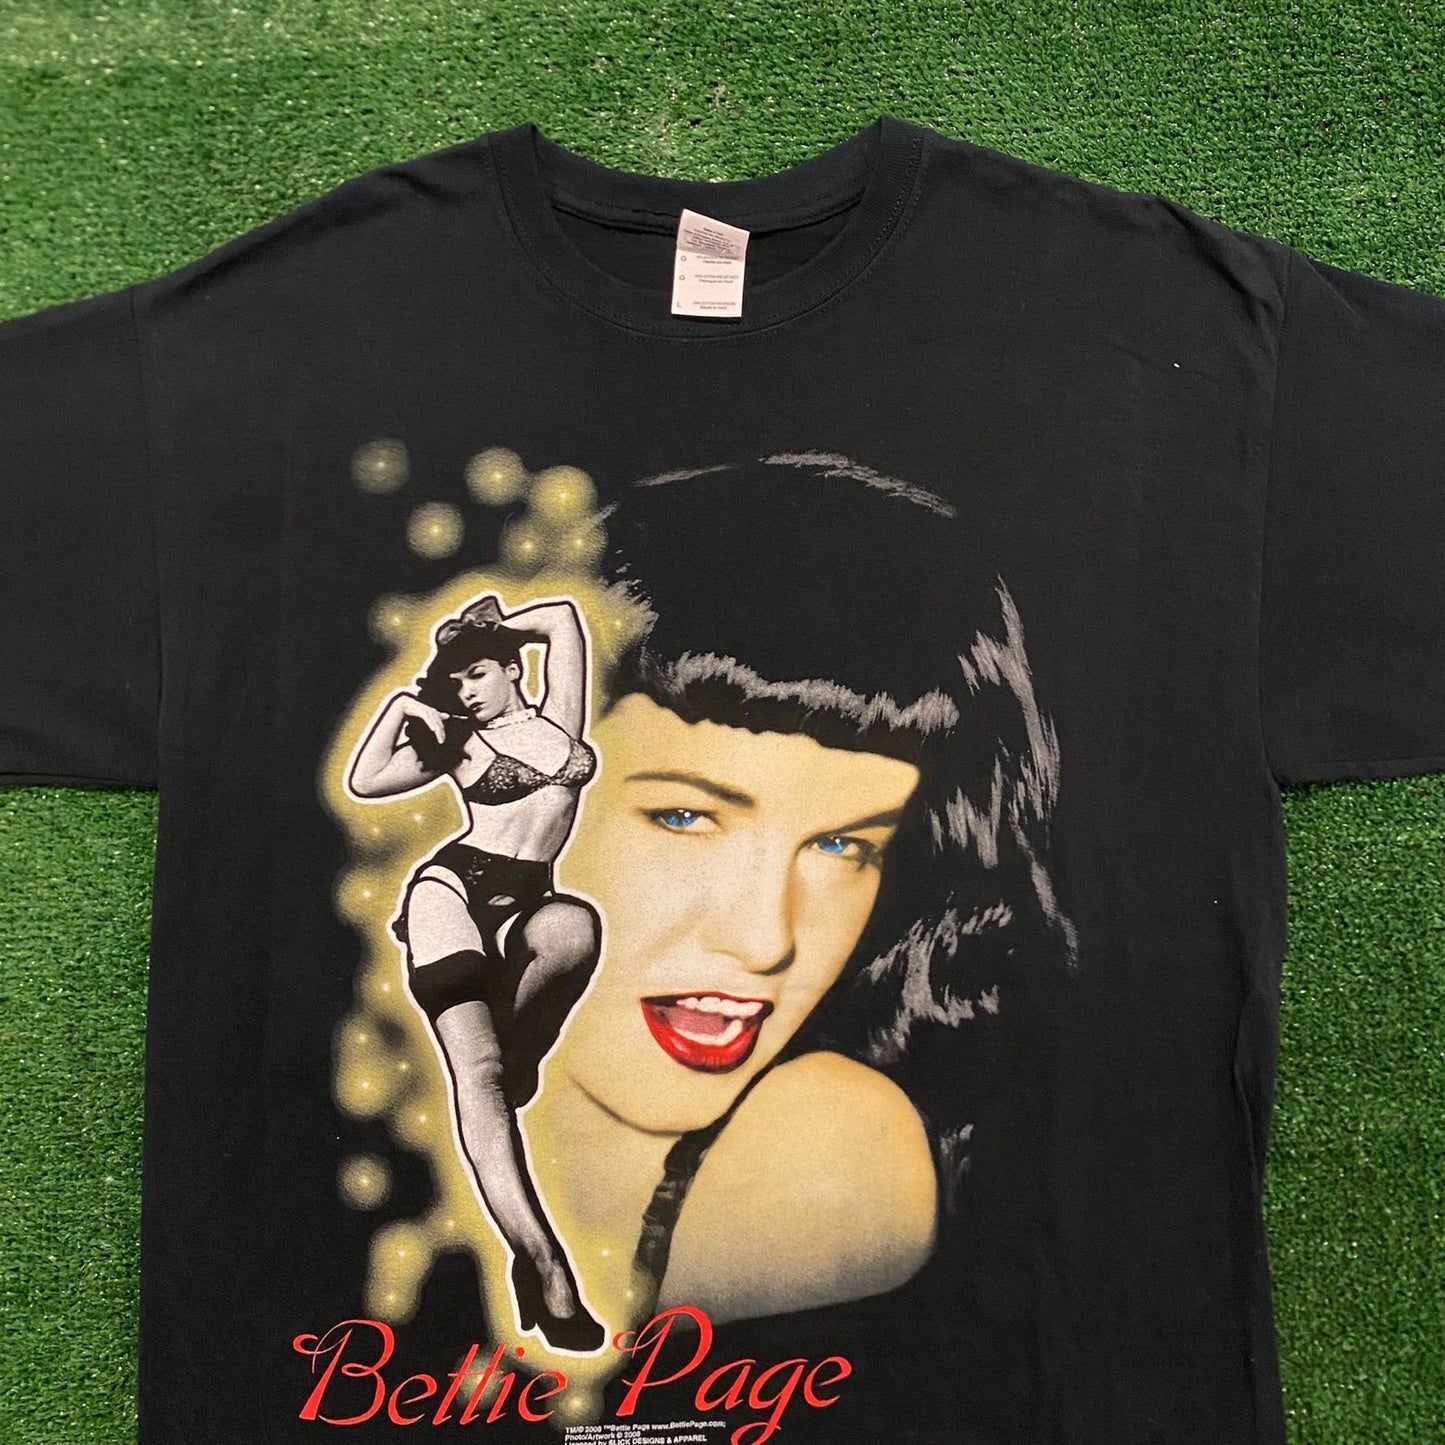 Bettie Page Sexy Pin Up Girl Vintage Playboy T-Shirt